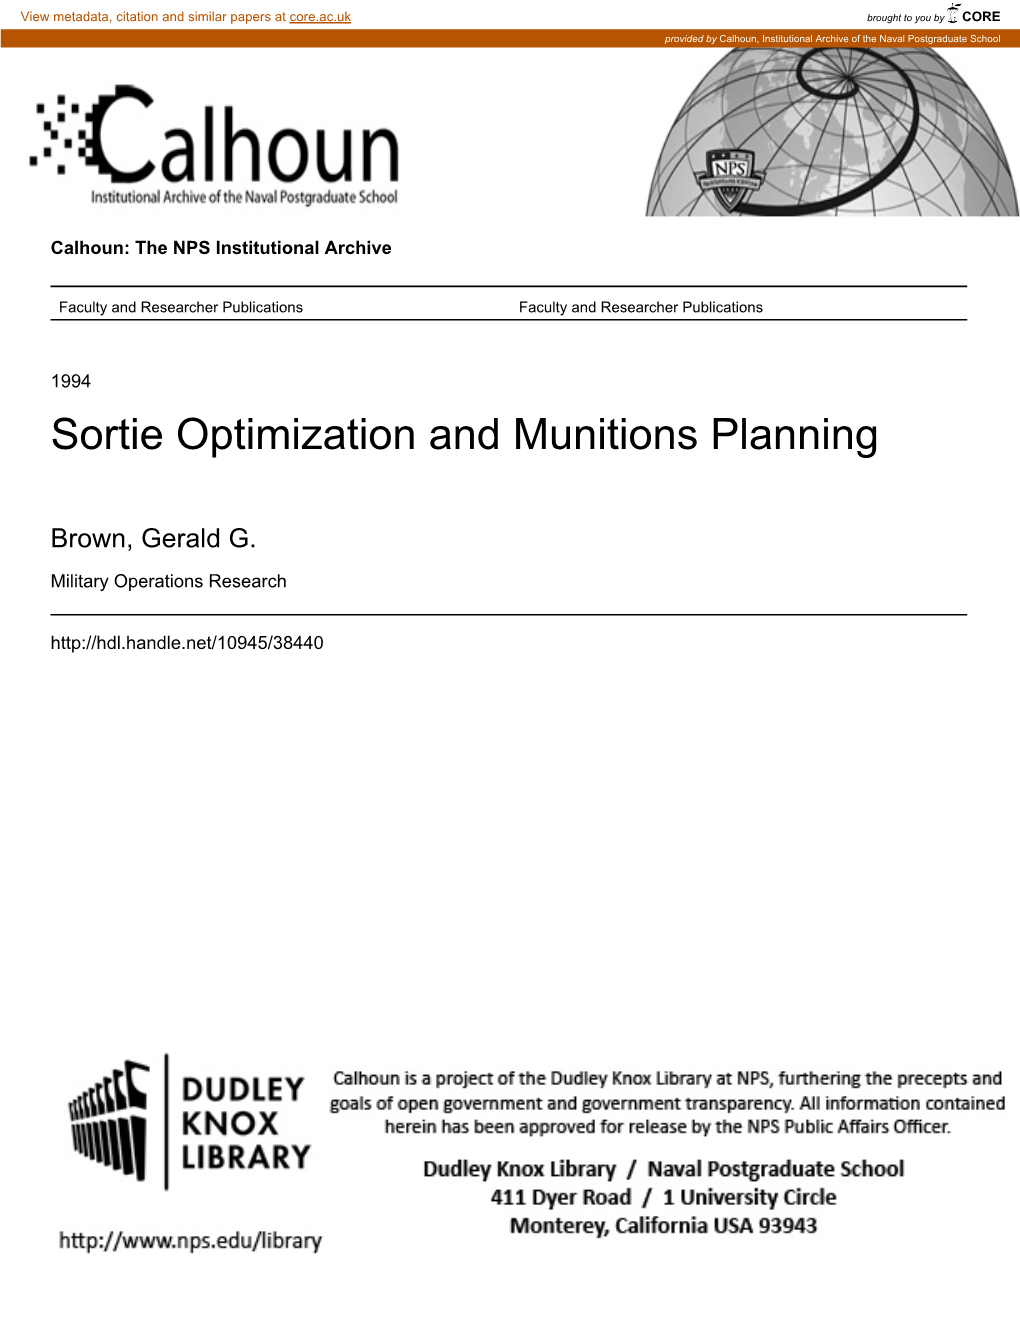 Sortie Optimization and Munitions Planning